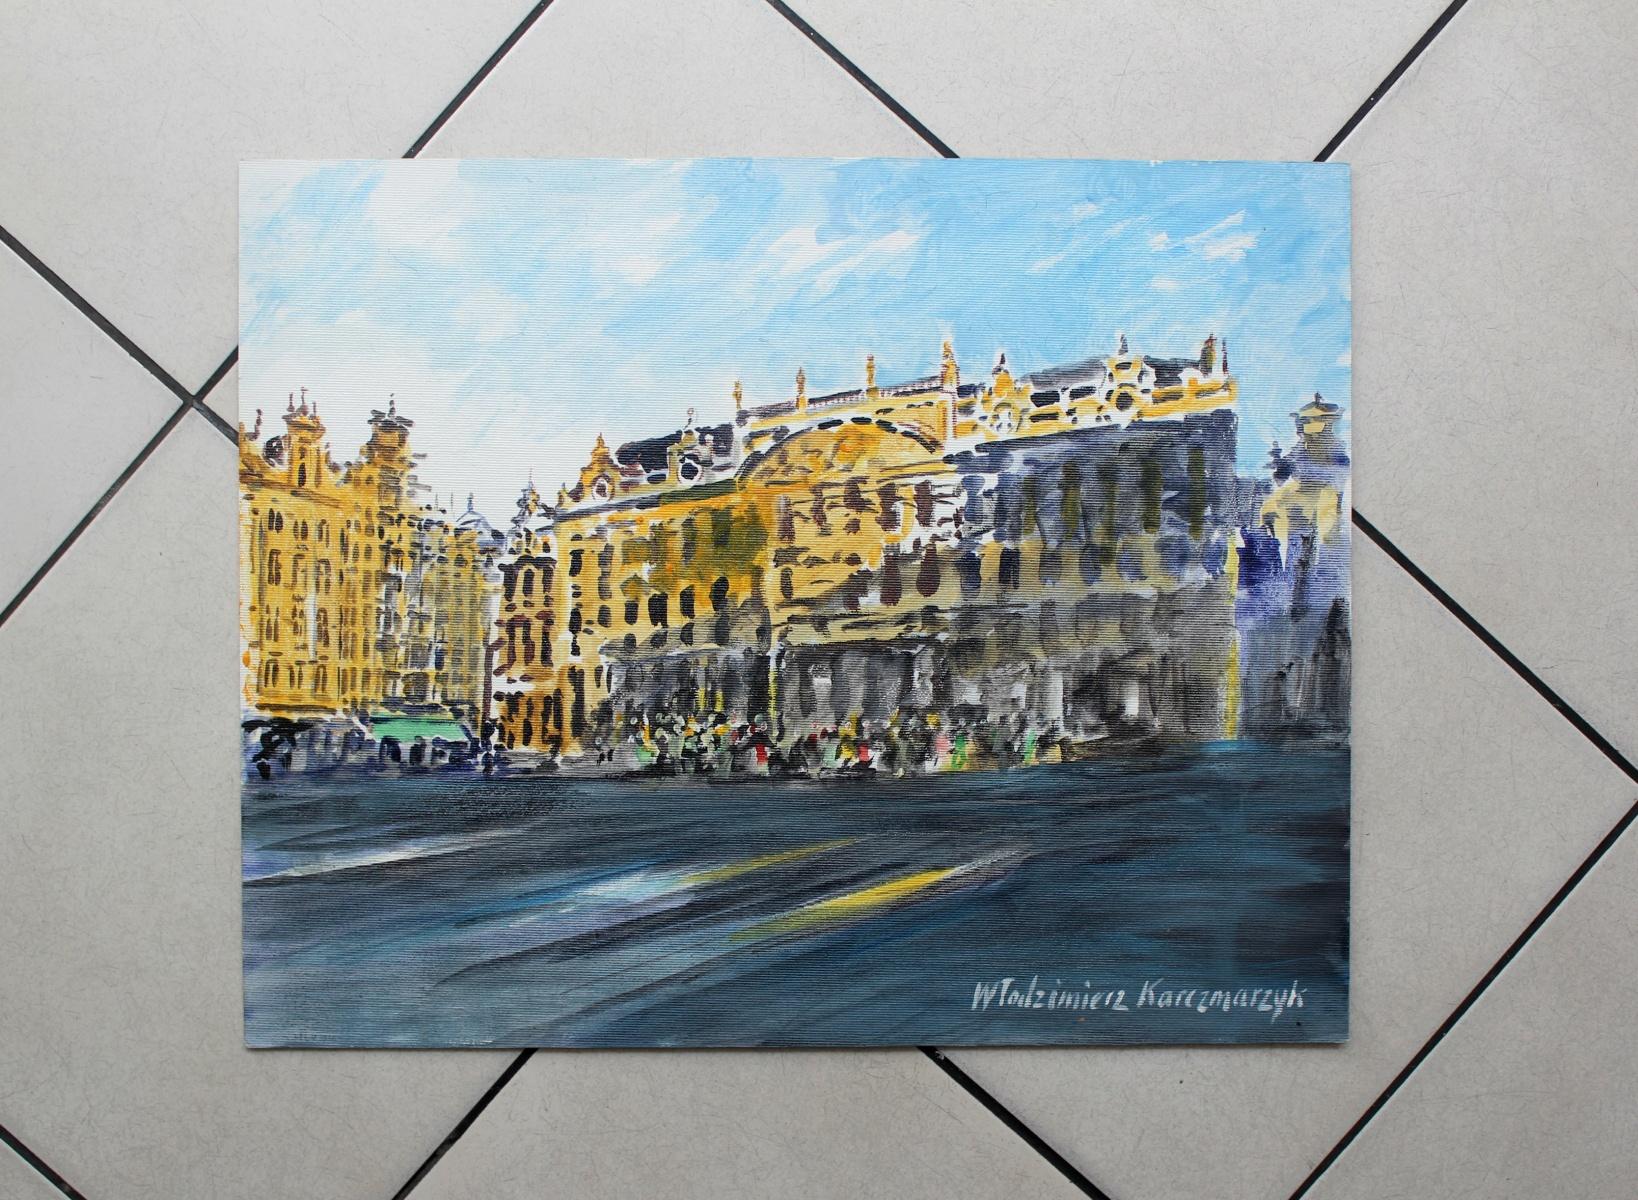 Brussels the Palace of Dukes of Brabant - 21 century Watercolor painting - Other Art Style Art by Włodzimierz Karczmarzyk